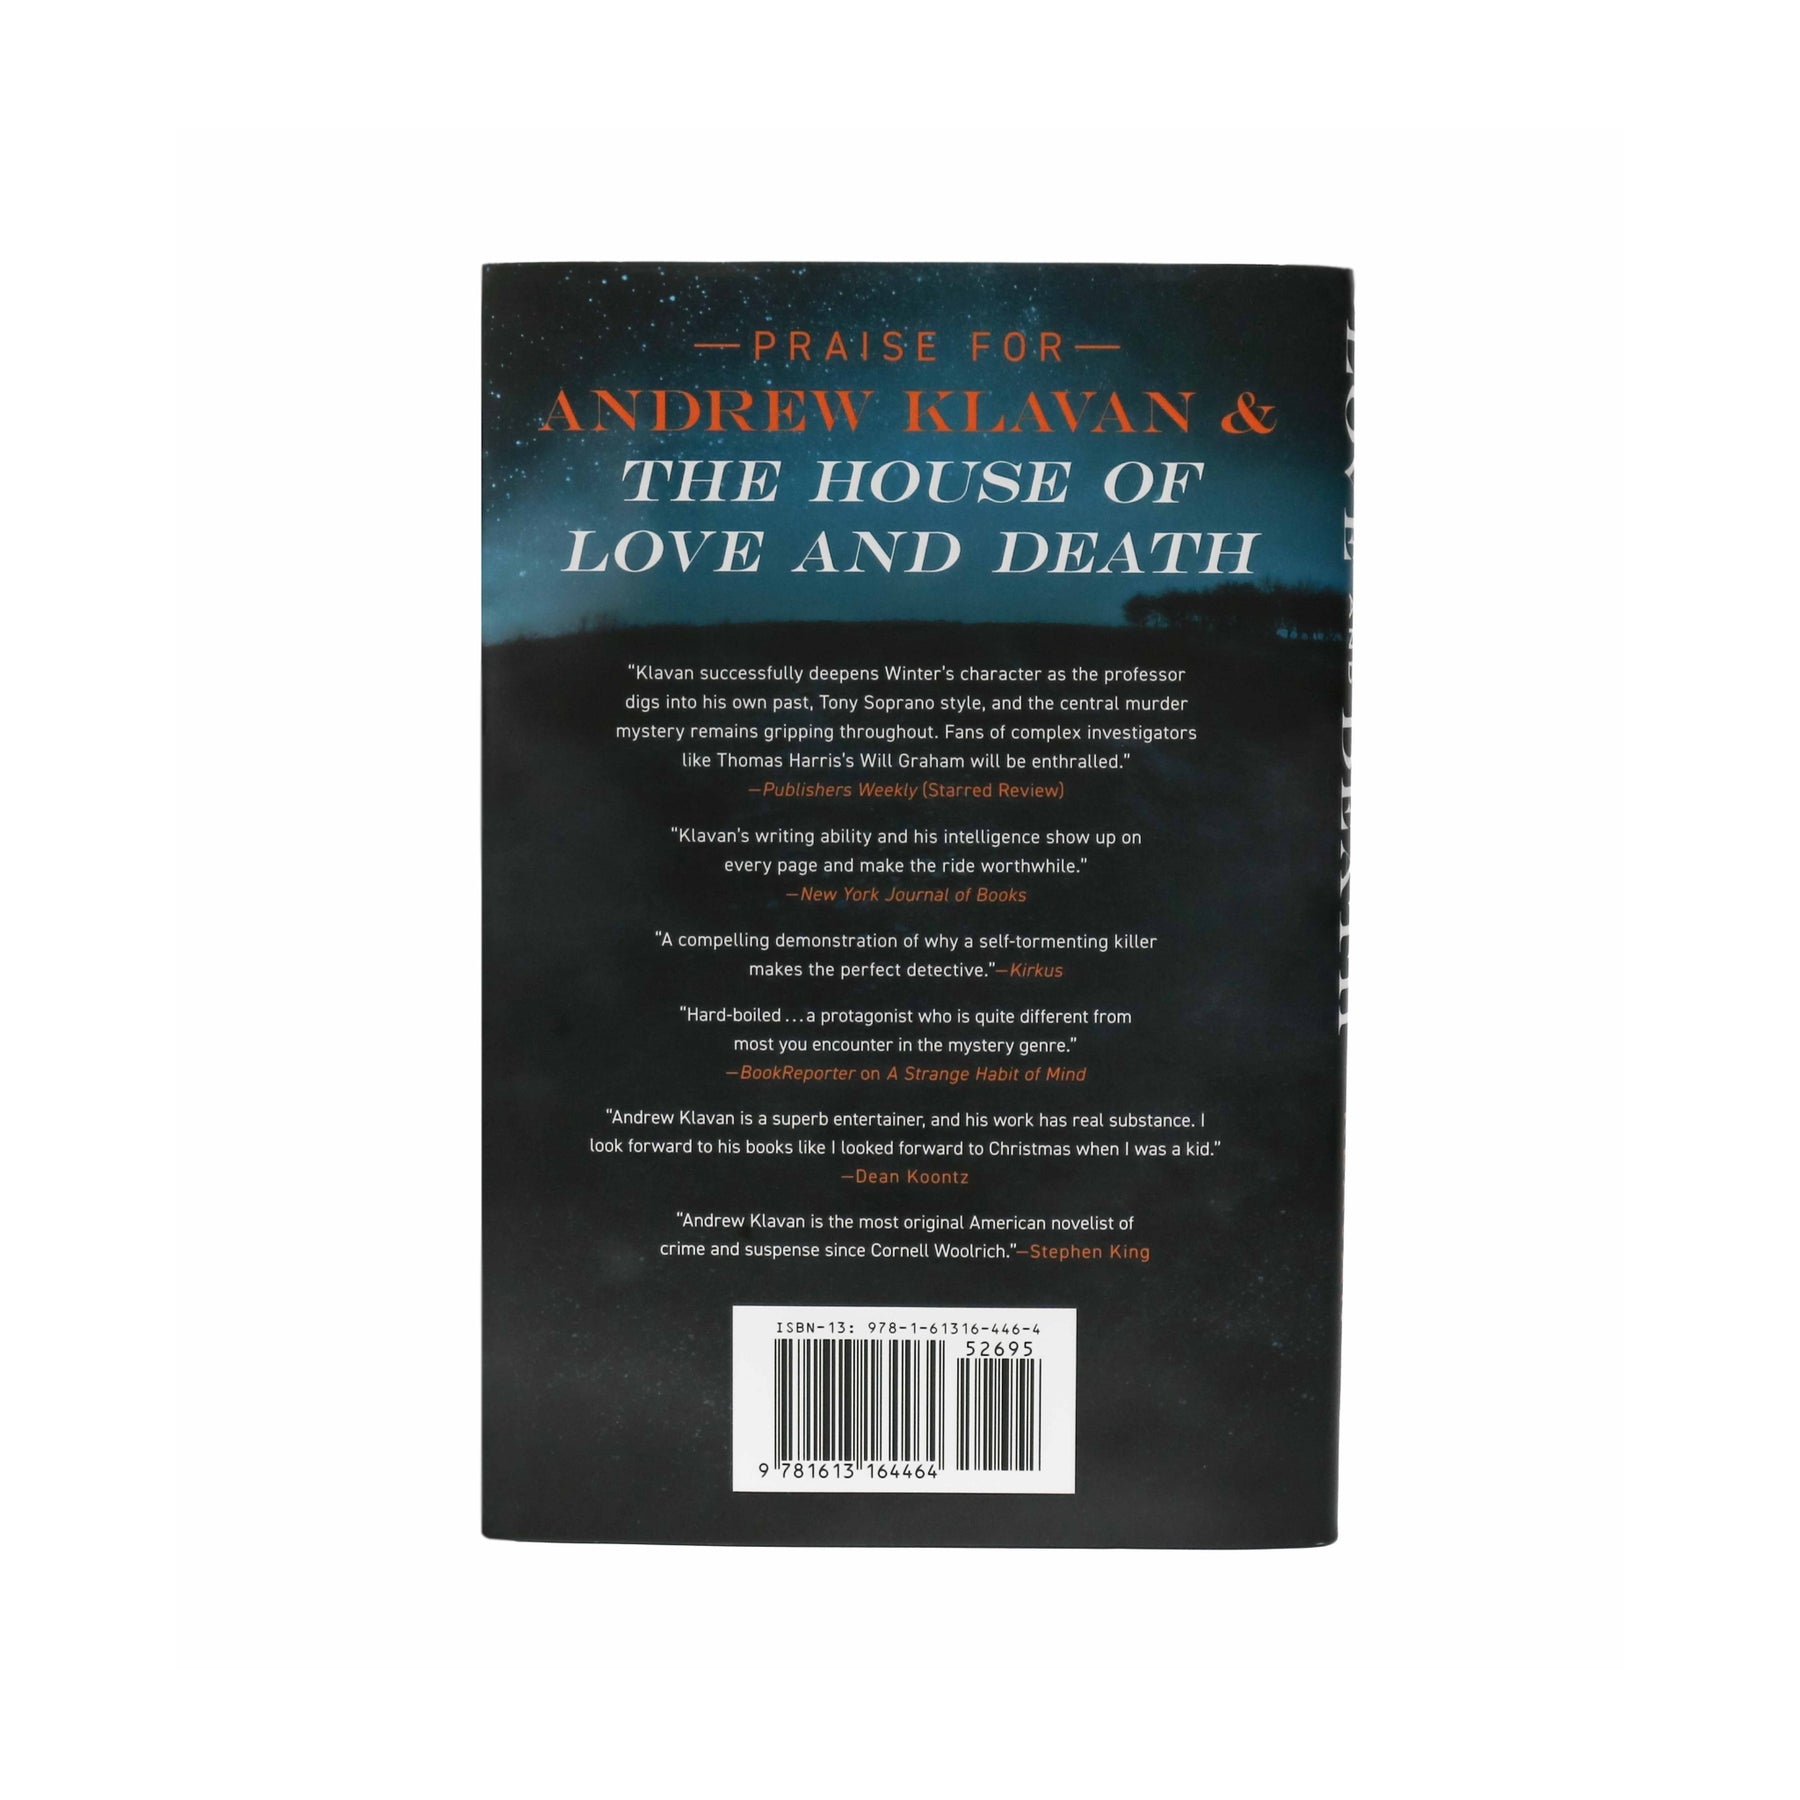 The House of Love and Death by Andrew Klavan – Daily Wire Shop